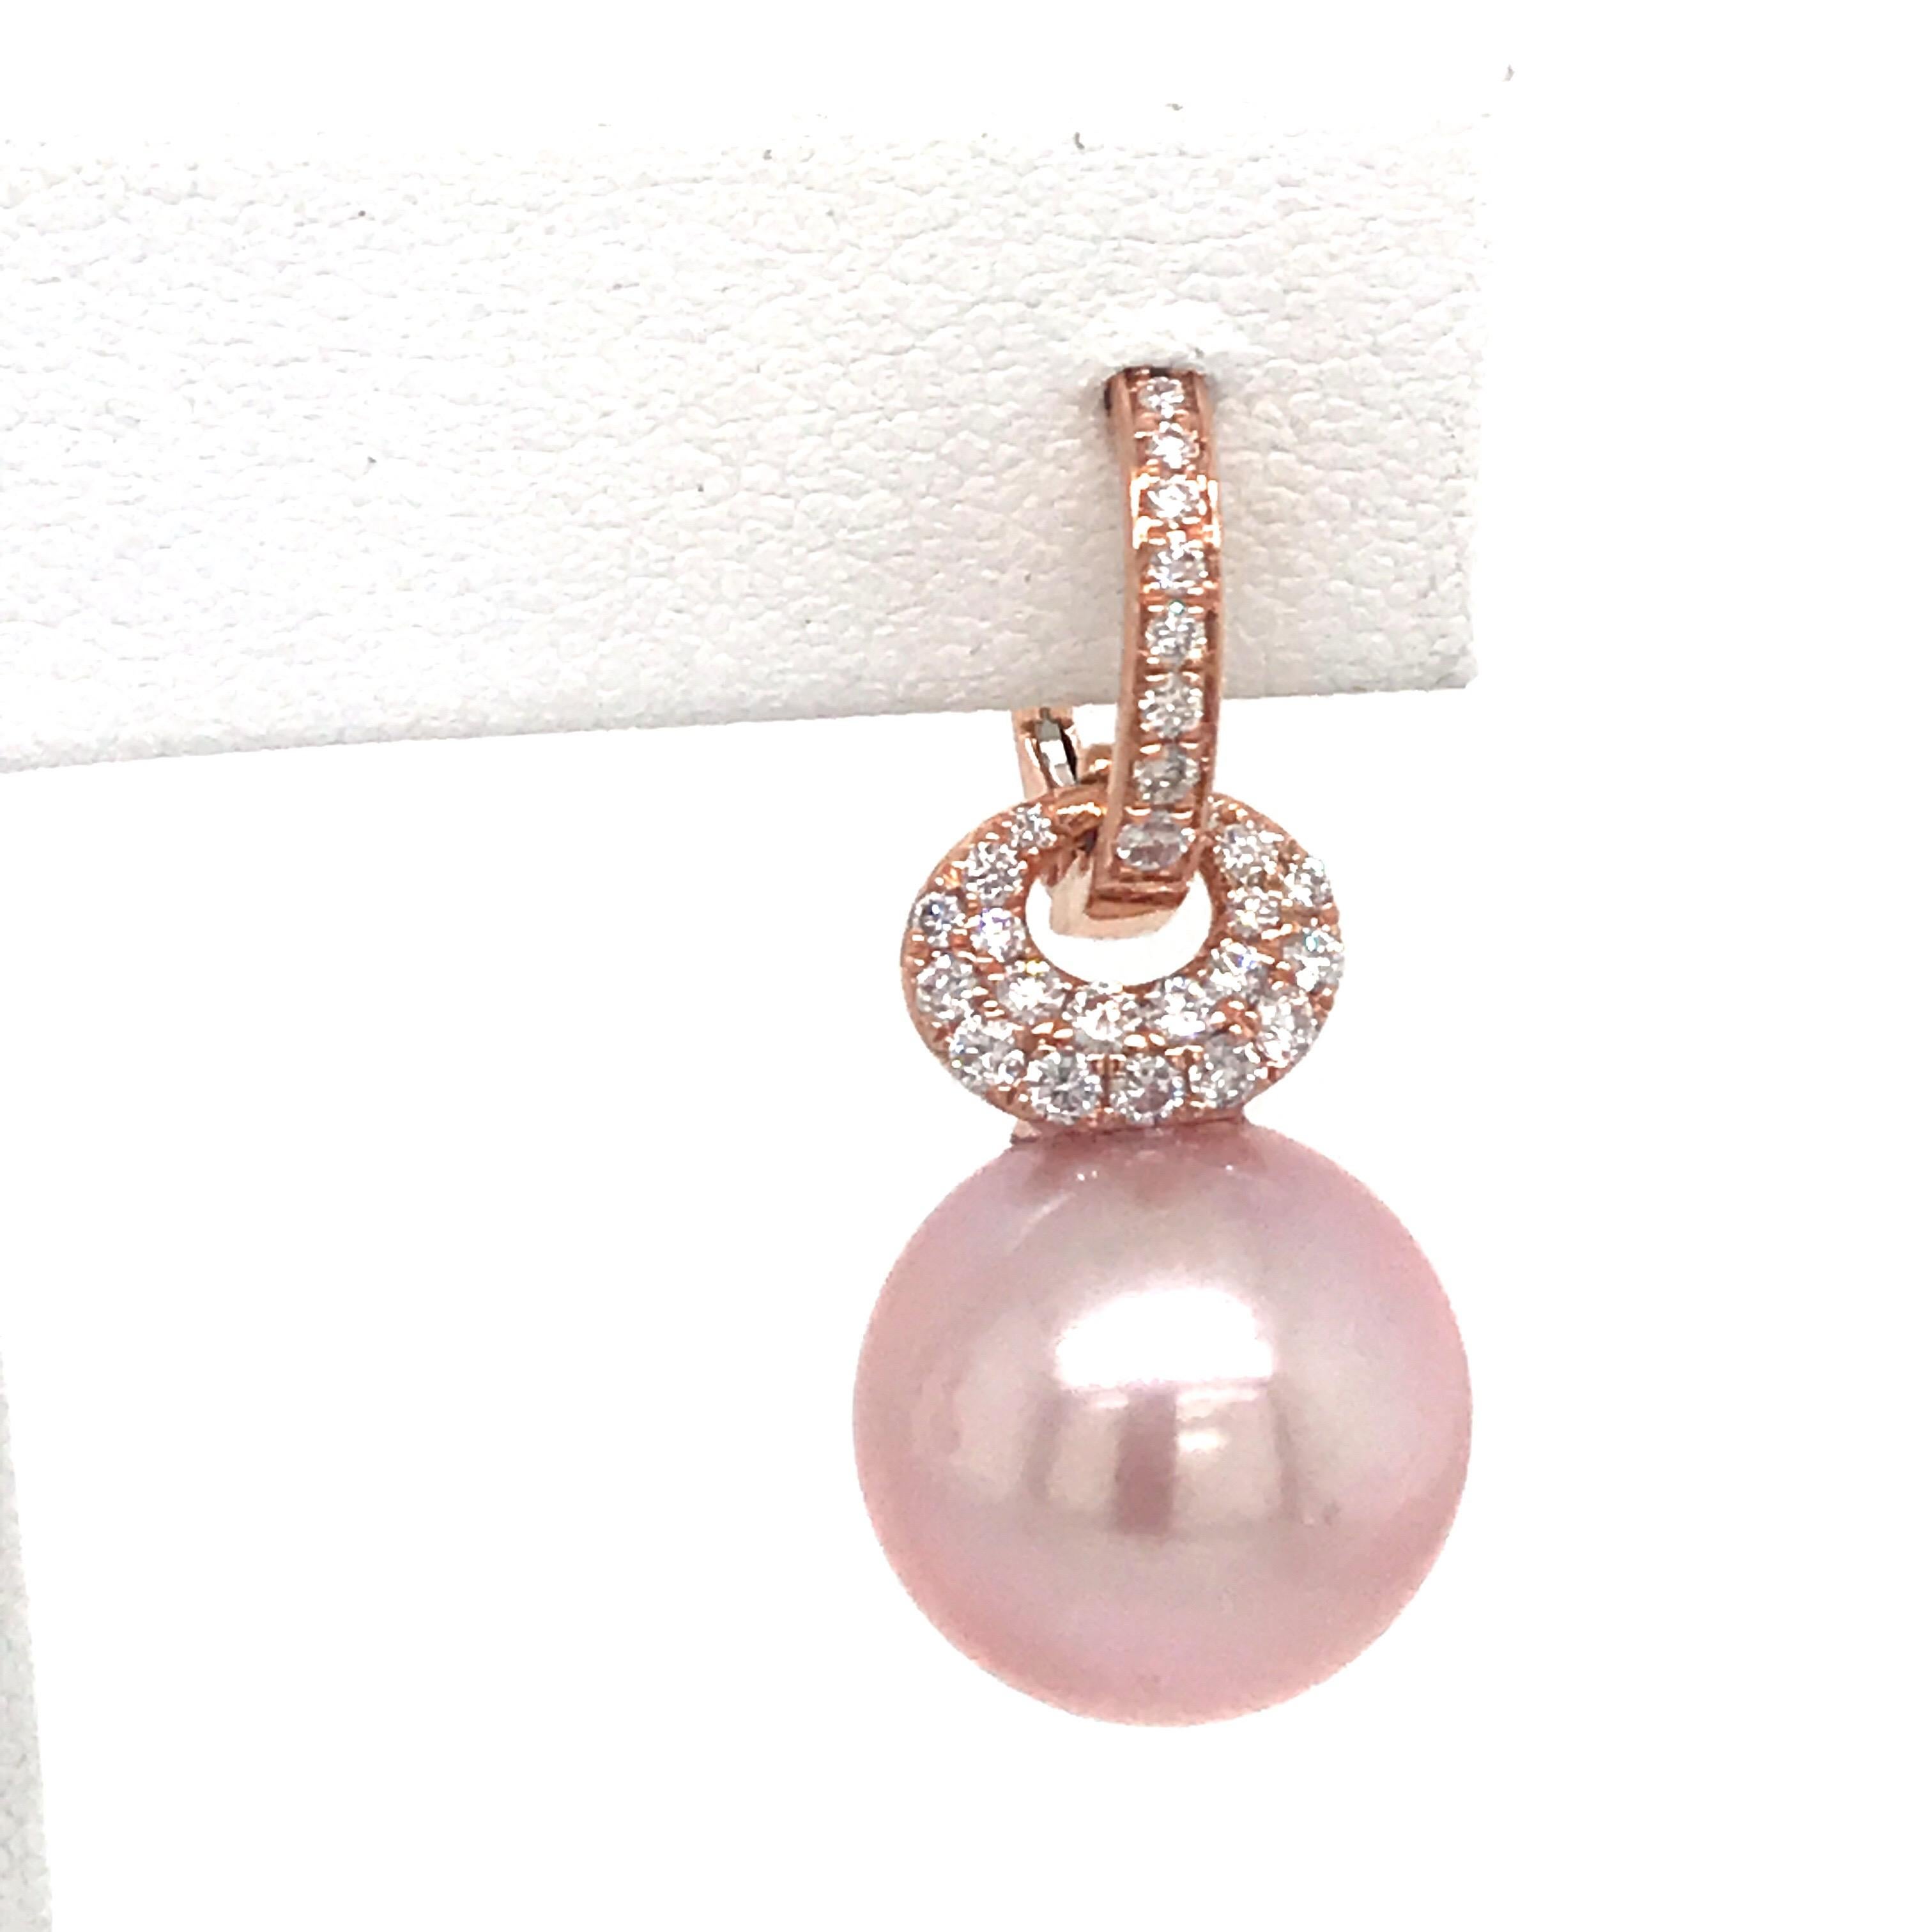 18K Rose gold drop earrings featuring two pink Freshwater Pearls measuring 12-13 mm and 56 round brilliants weighing 0.57 carats. 
Color G-H
Clarity SI